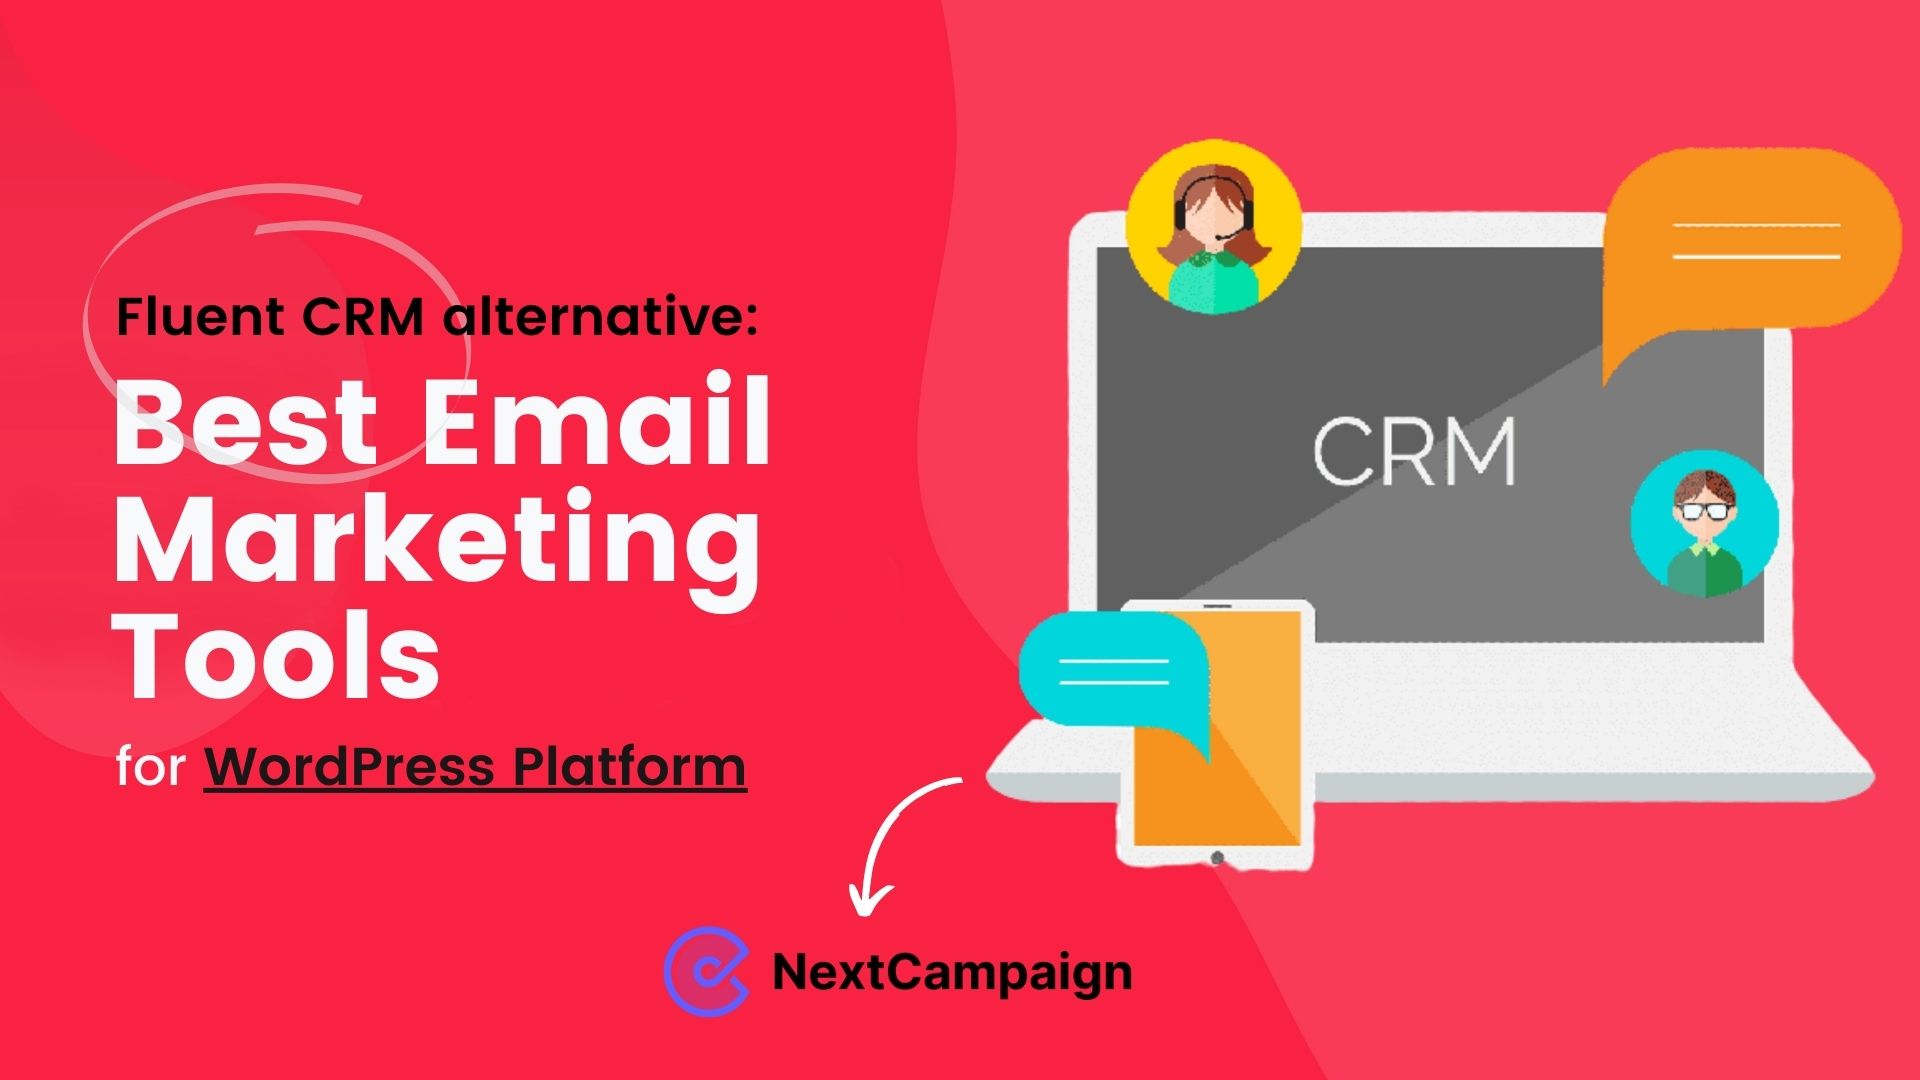 Fluent CRM alternative: The Best Email Marketing Tools